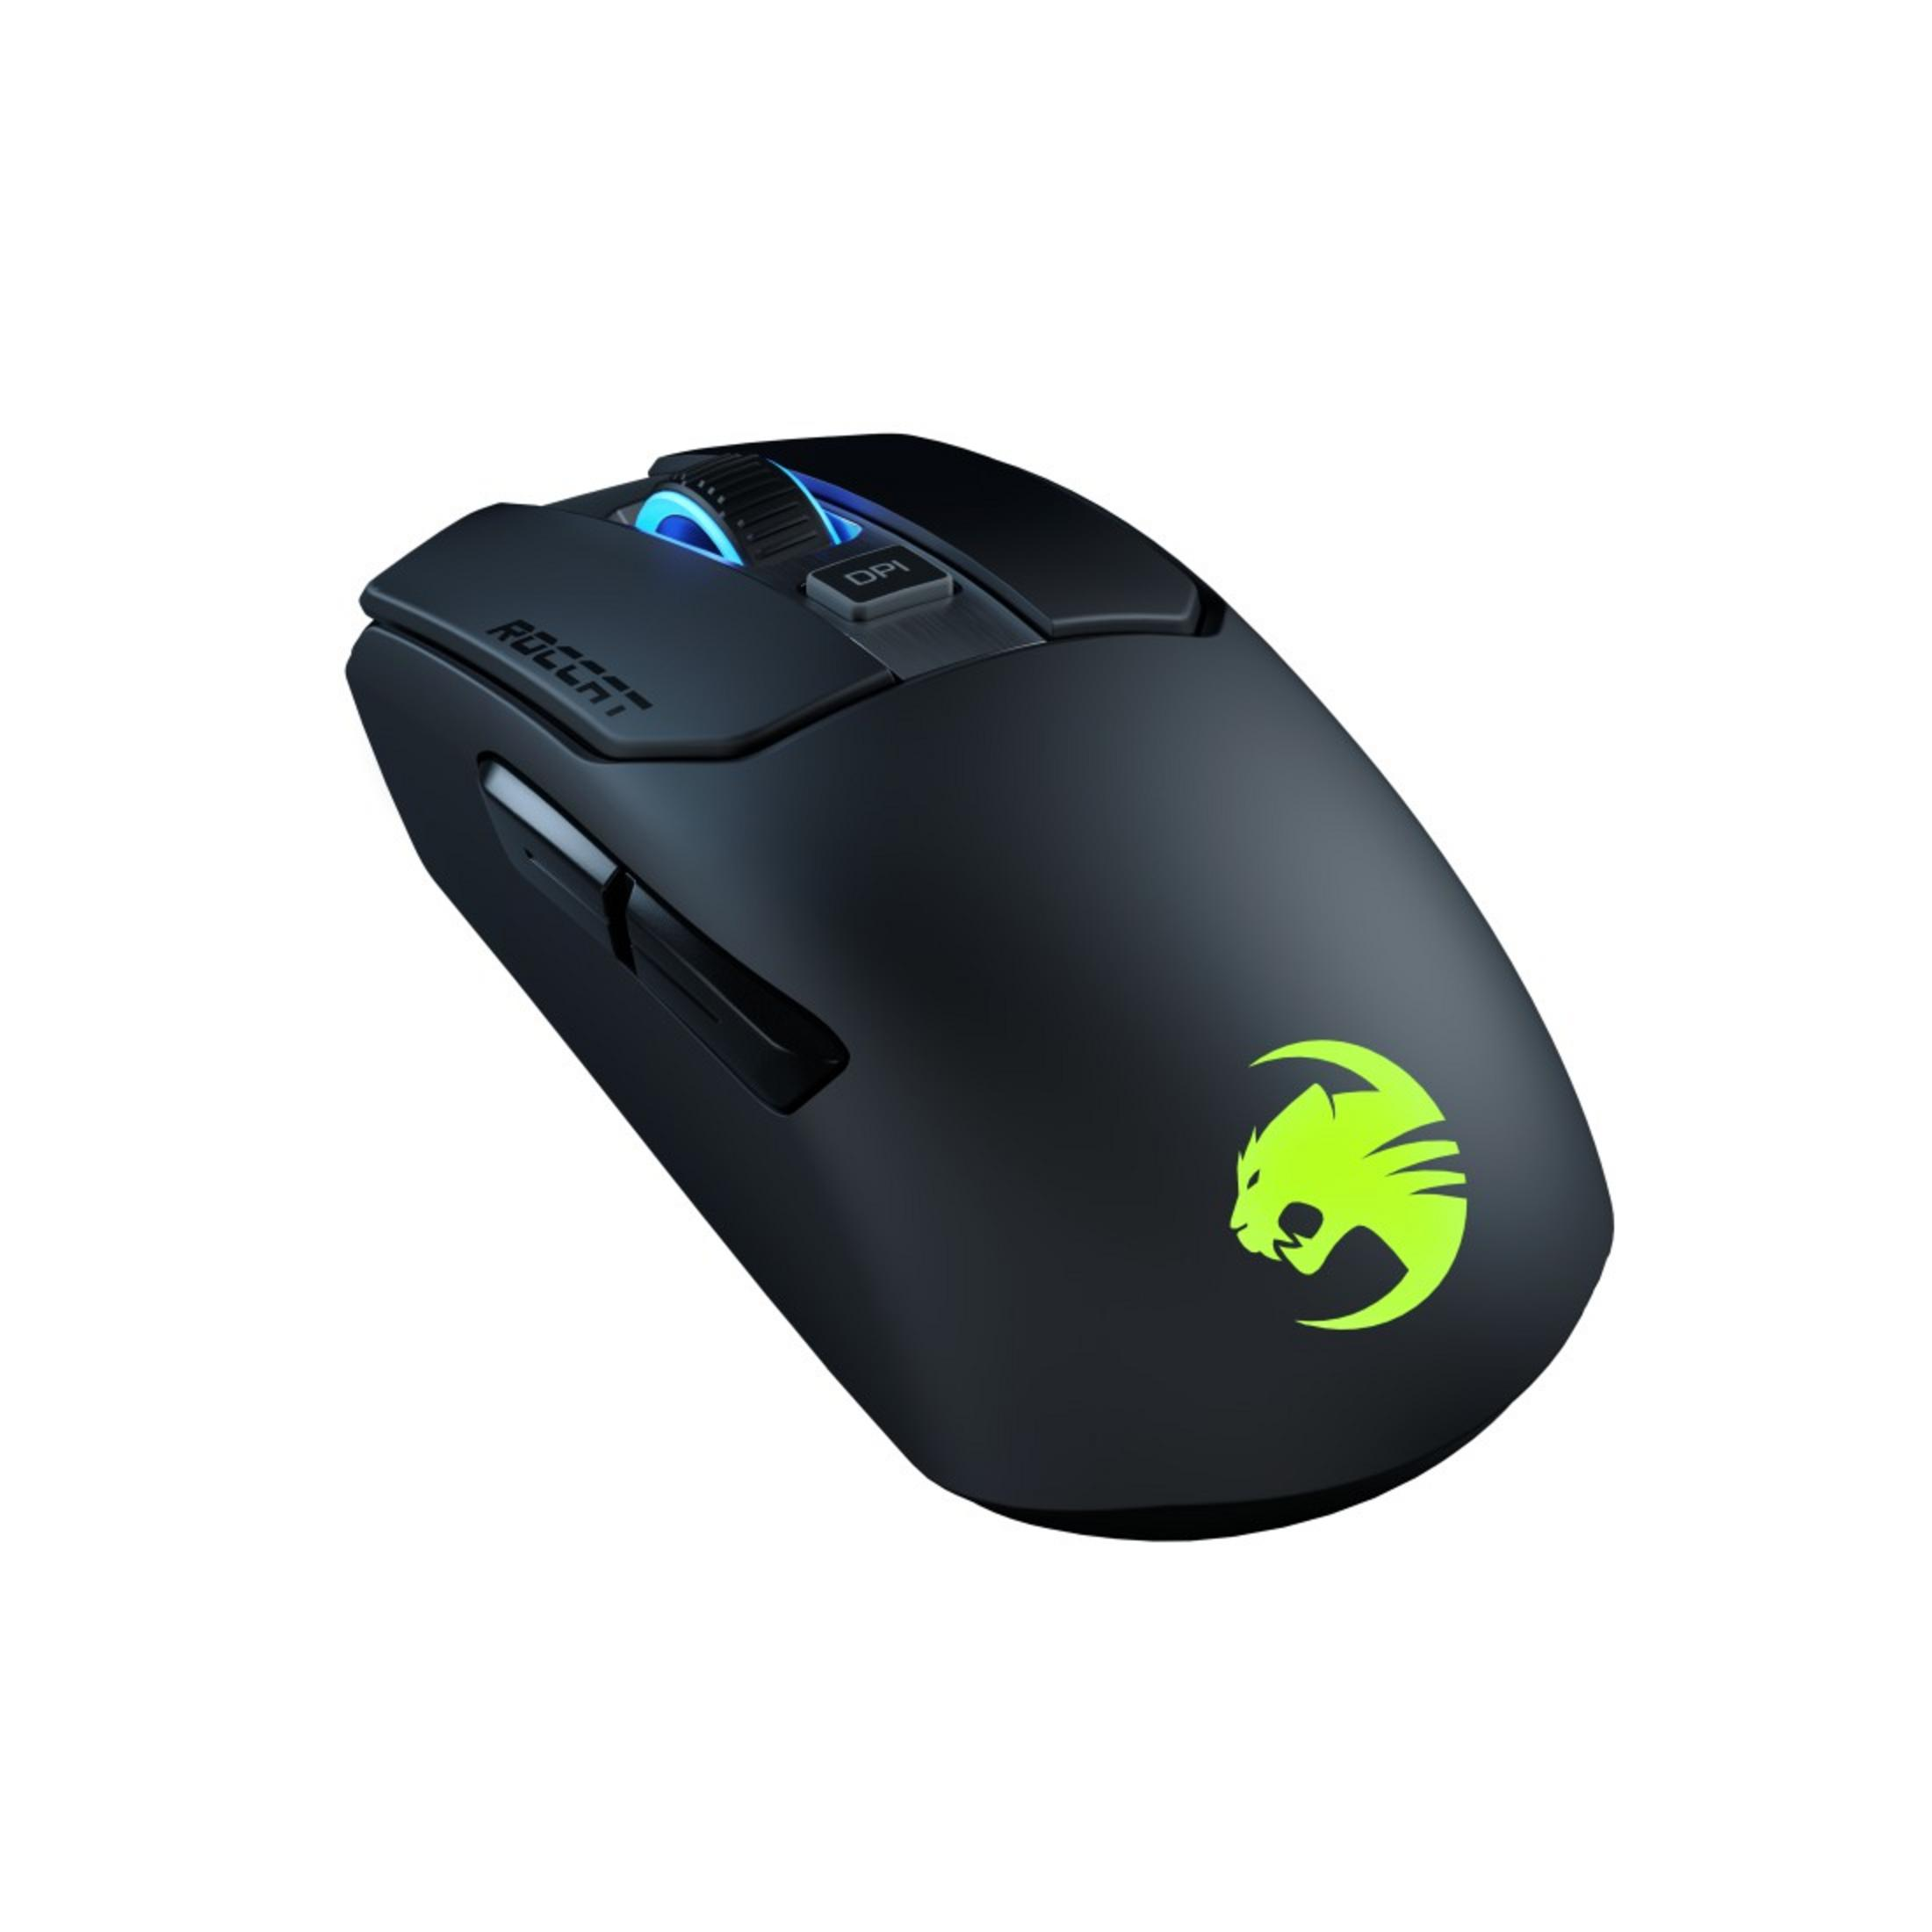 GAMING Gaming 200 ROC-11-615-BK ROCCAT Maus, MOUSE Schwarz KAIN AIMO